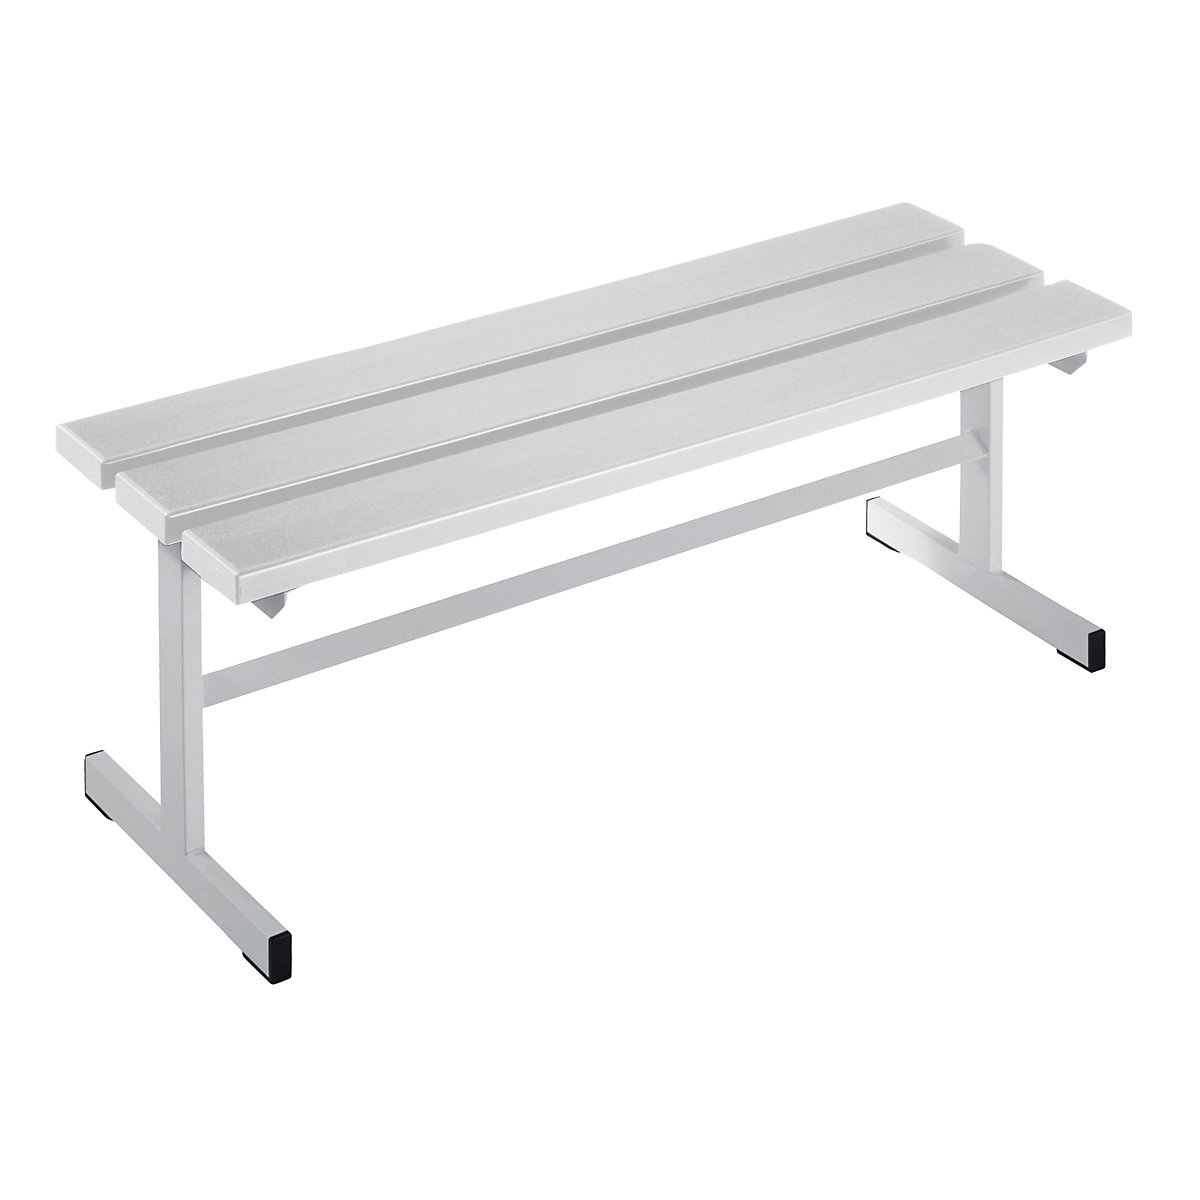 Wolf – Cloakroom bench, single sided seat, light grey, length 1000 mm